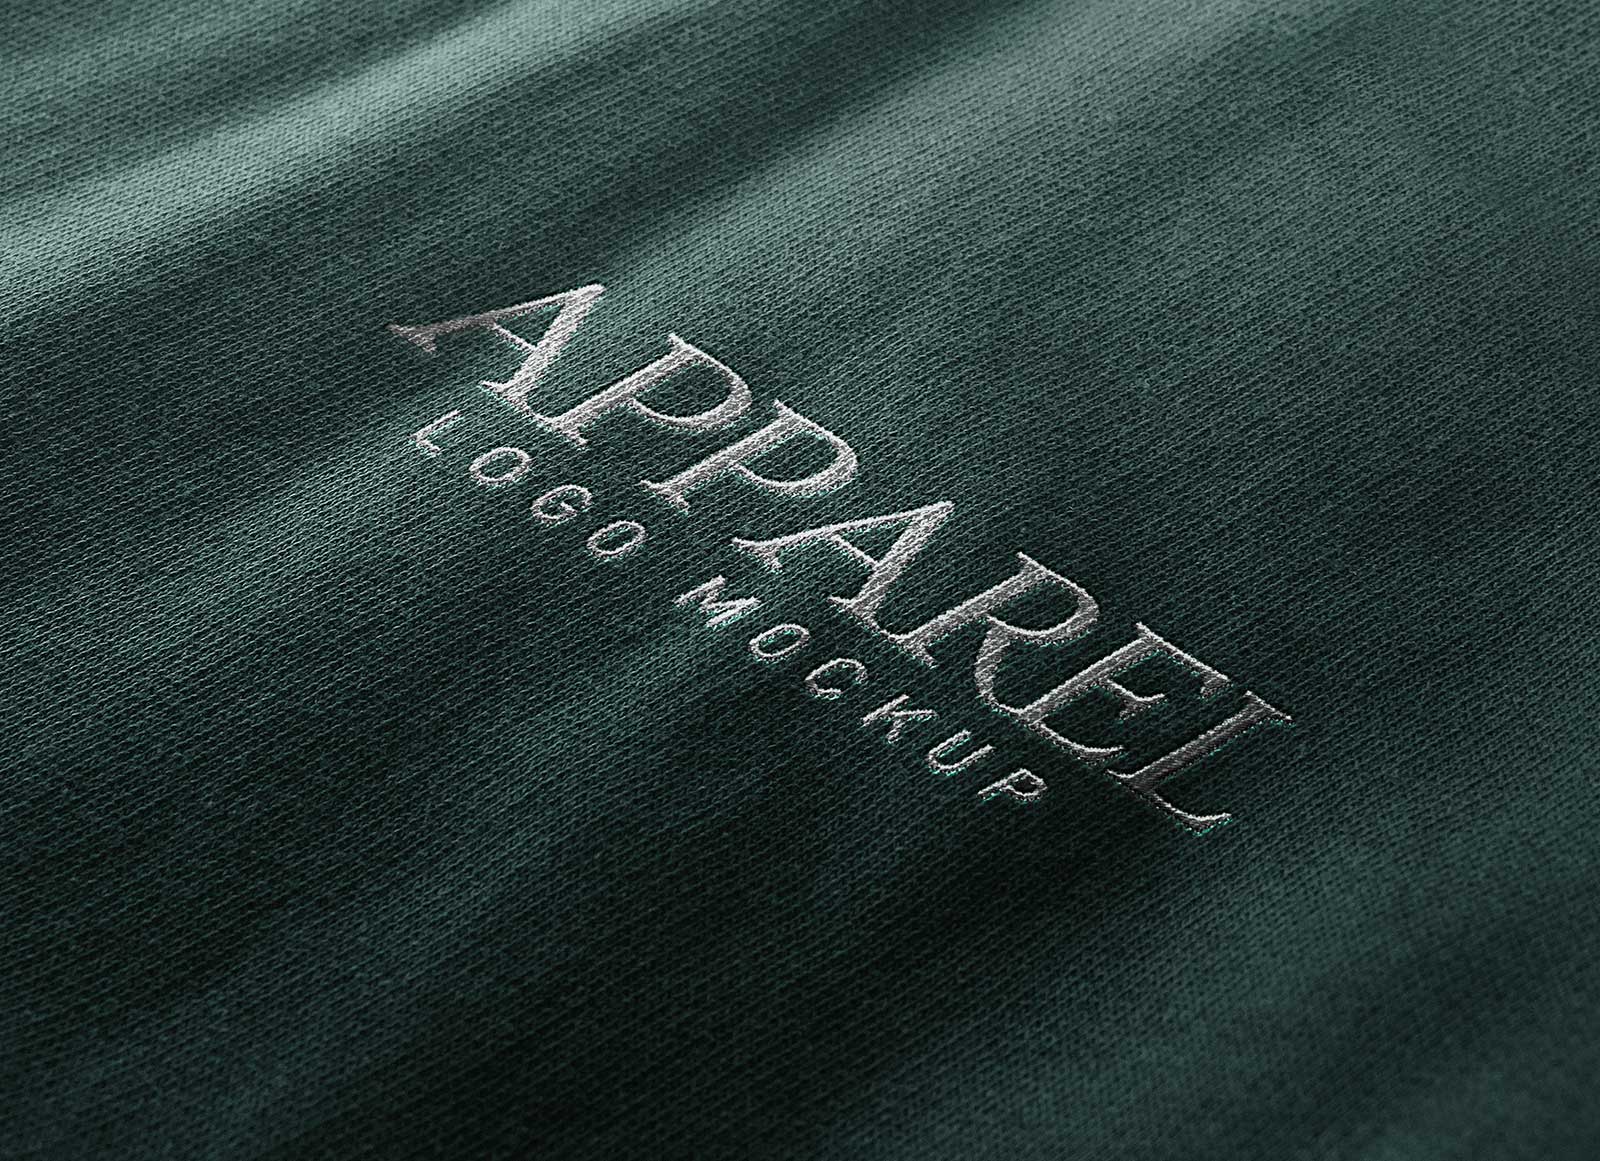 Free Clothing Textured Embroidered Logo Mockup PSD